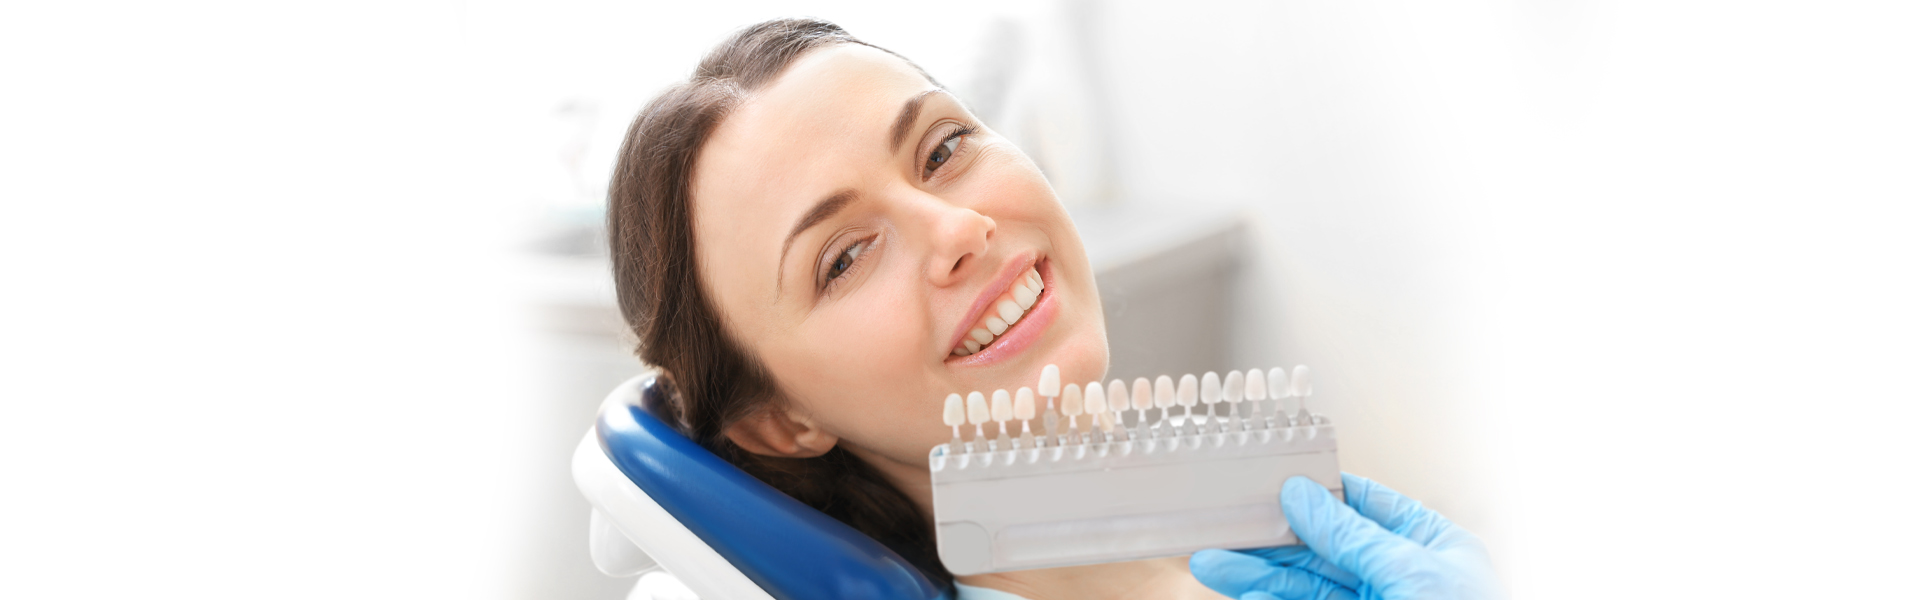 Electronic Anesthesia for Veneers and Implants